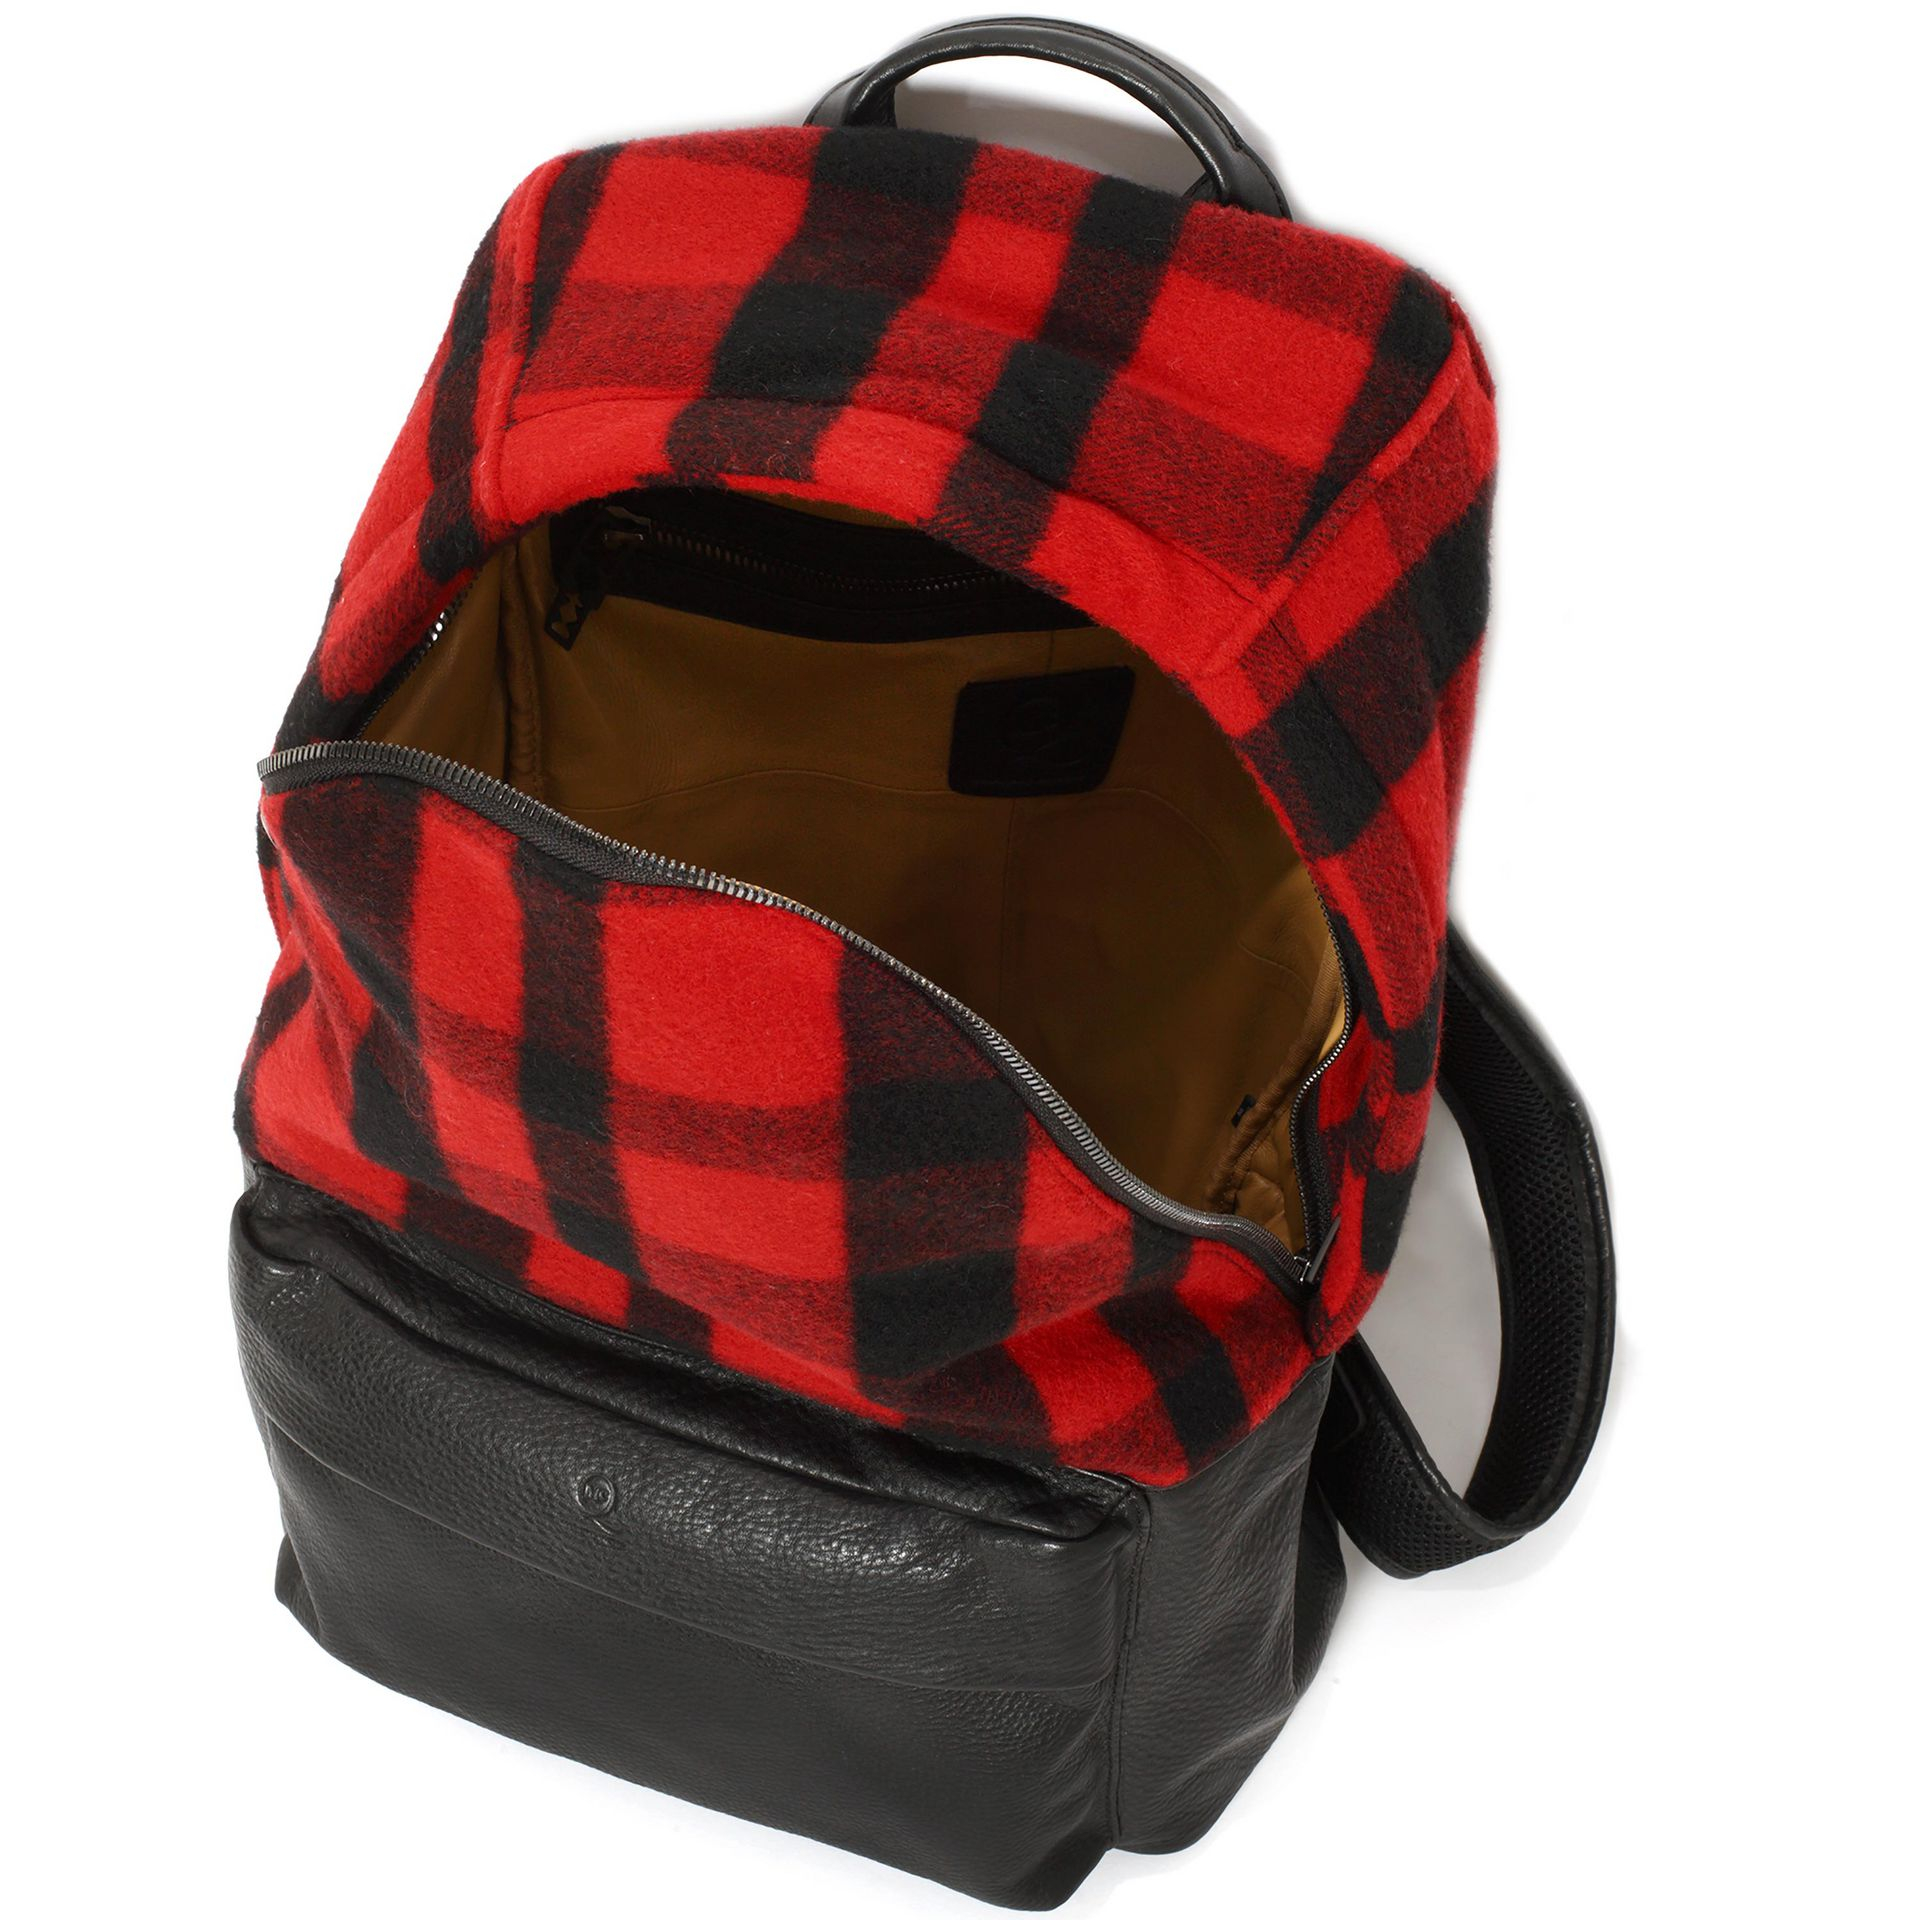 McQ Lumberjack Leather Backpack in Red for Men - Lyst